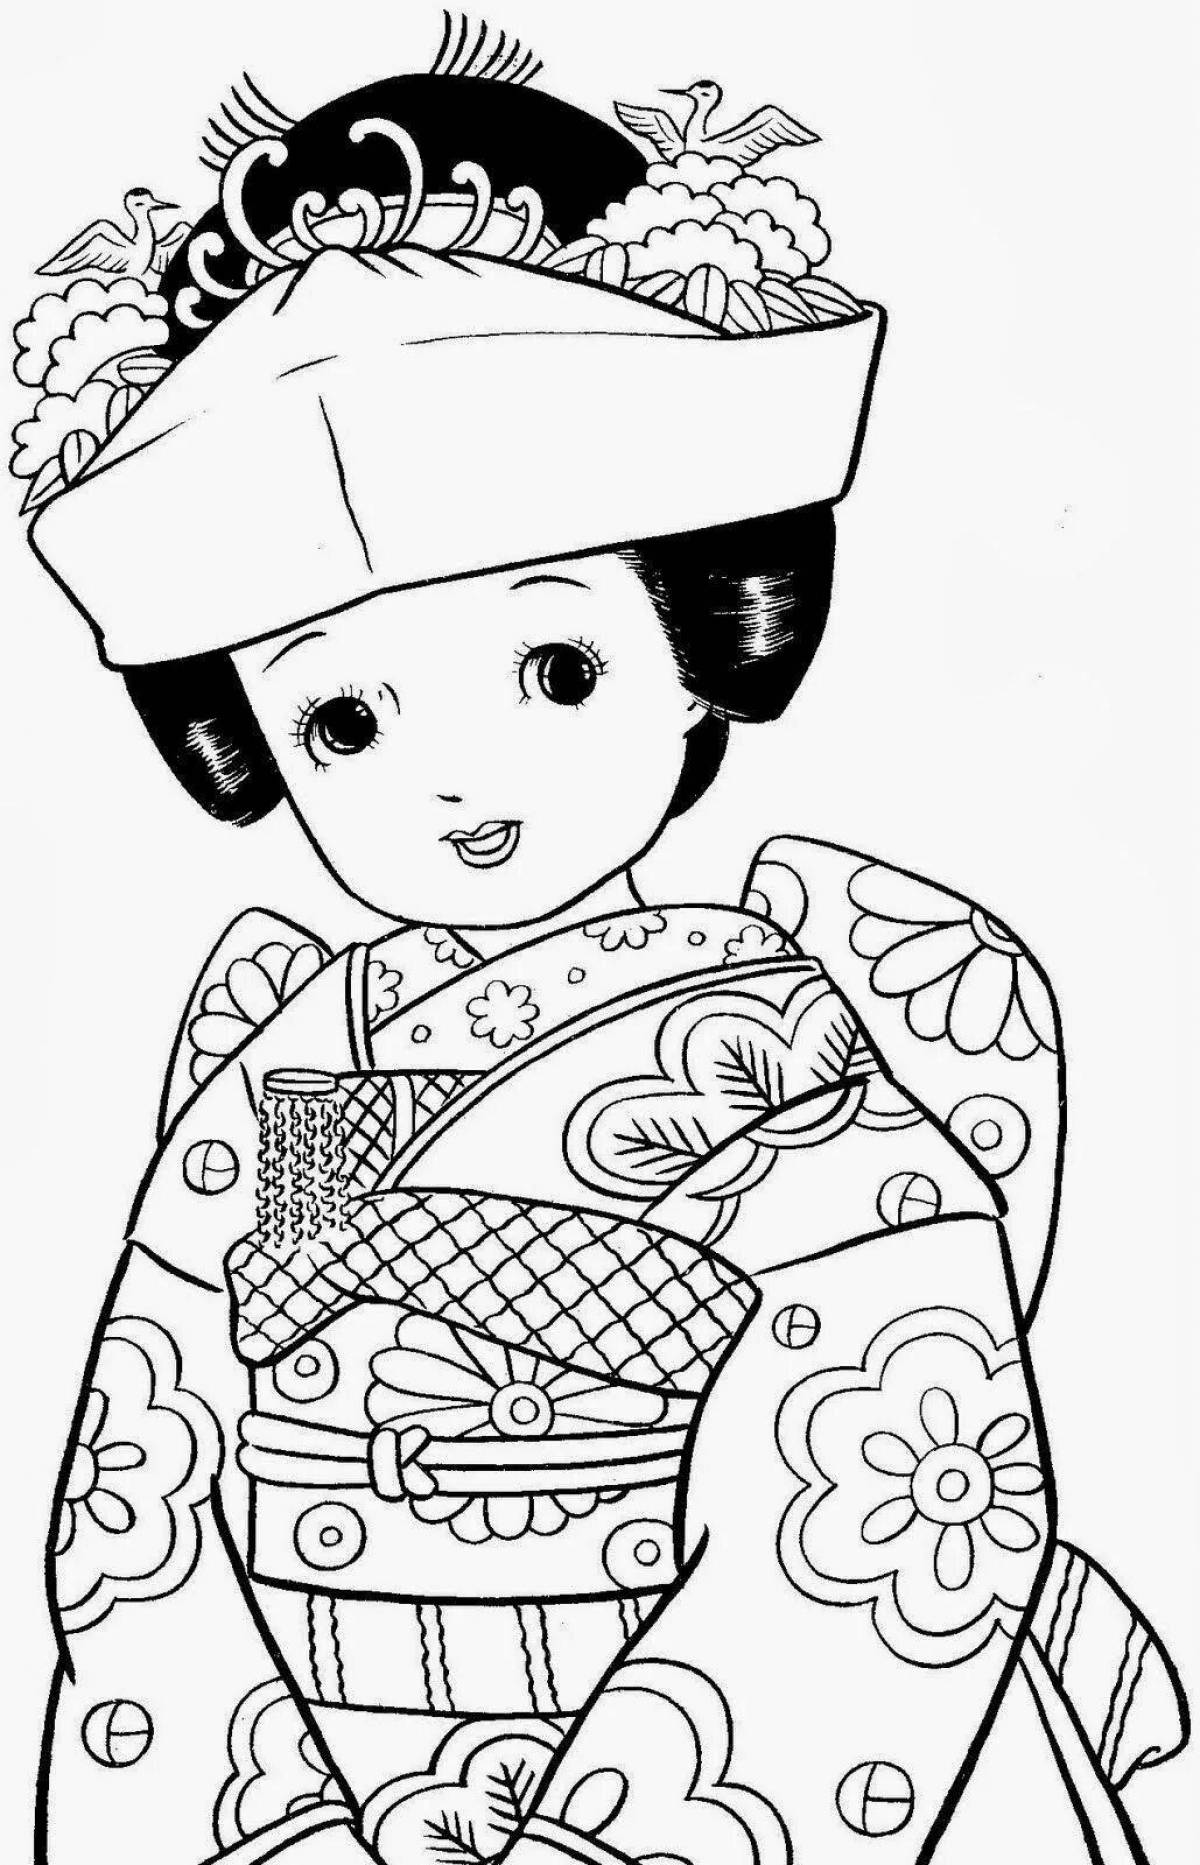 Colorful Japanese coloring book